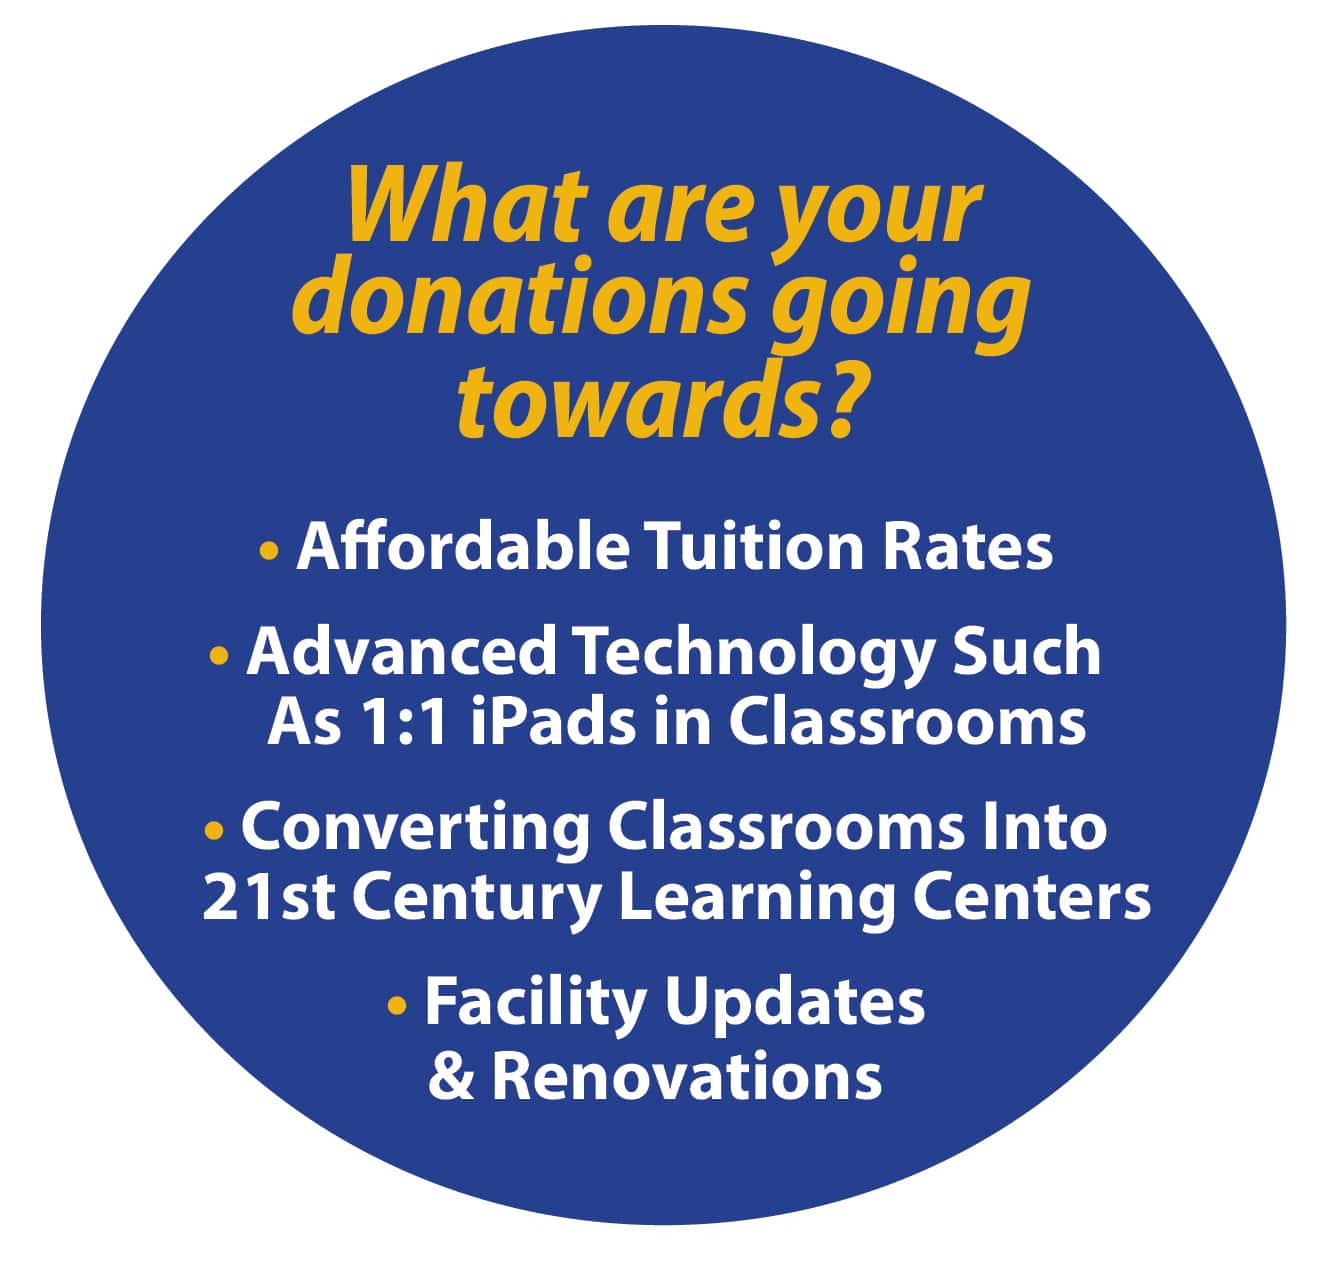 What are your donations going towards? Affordable Tuition rates, advanced Technology, converting classrooms into 21st century learning centers, and facility updates and renovations